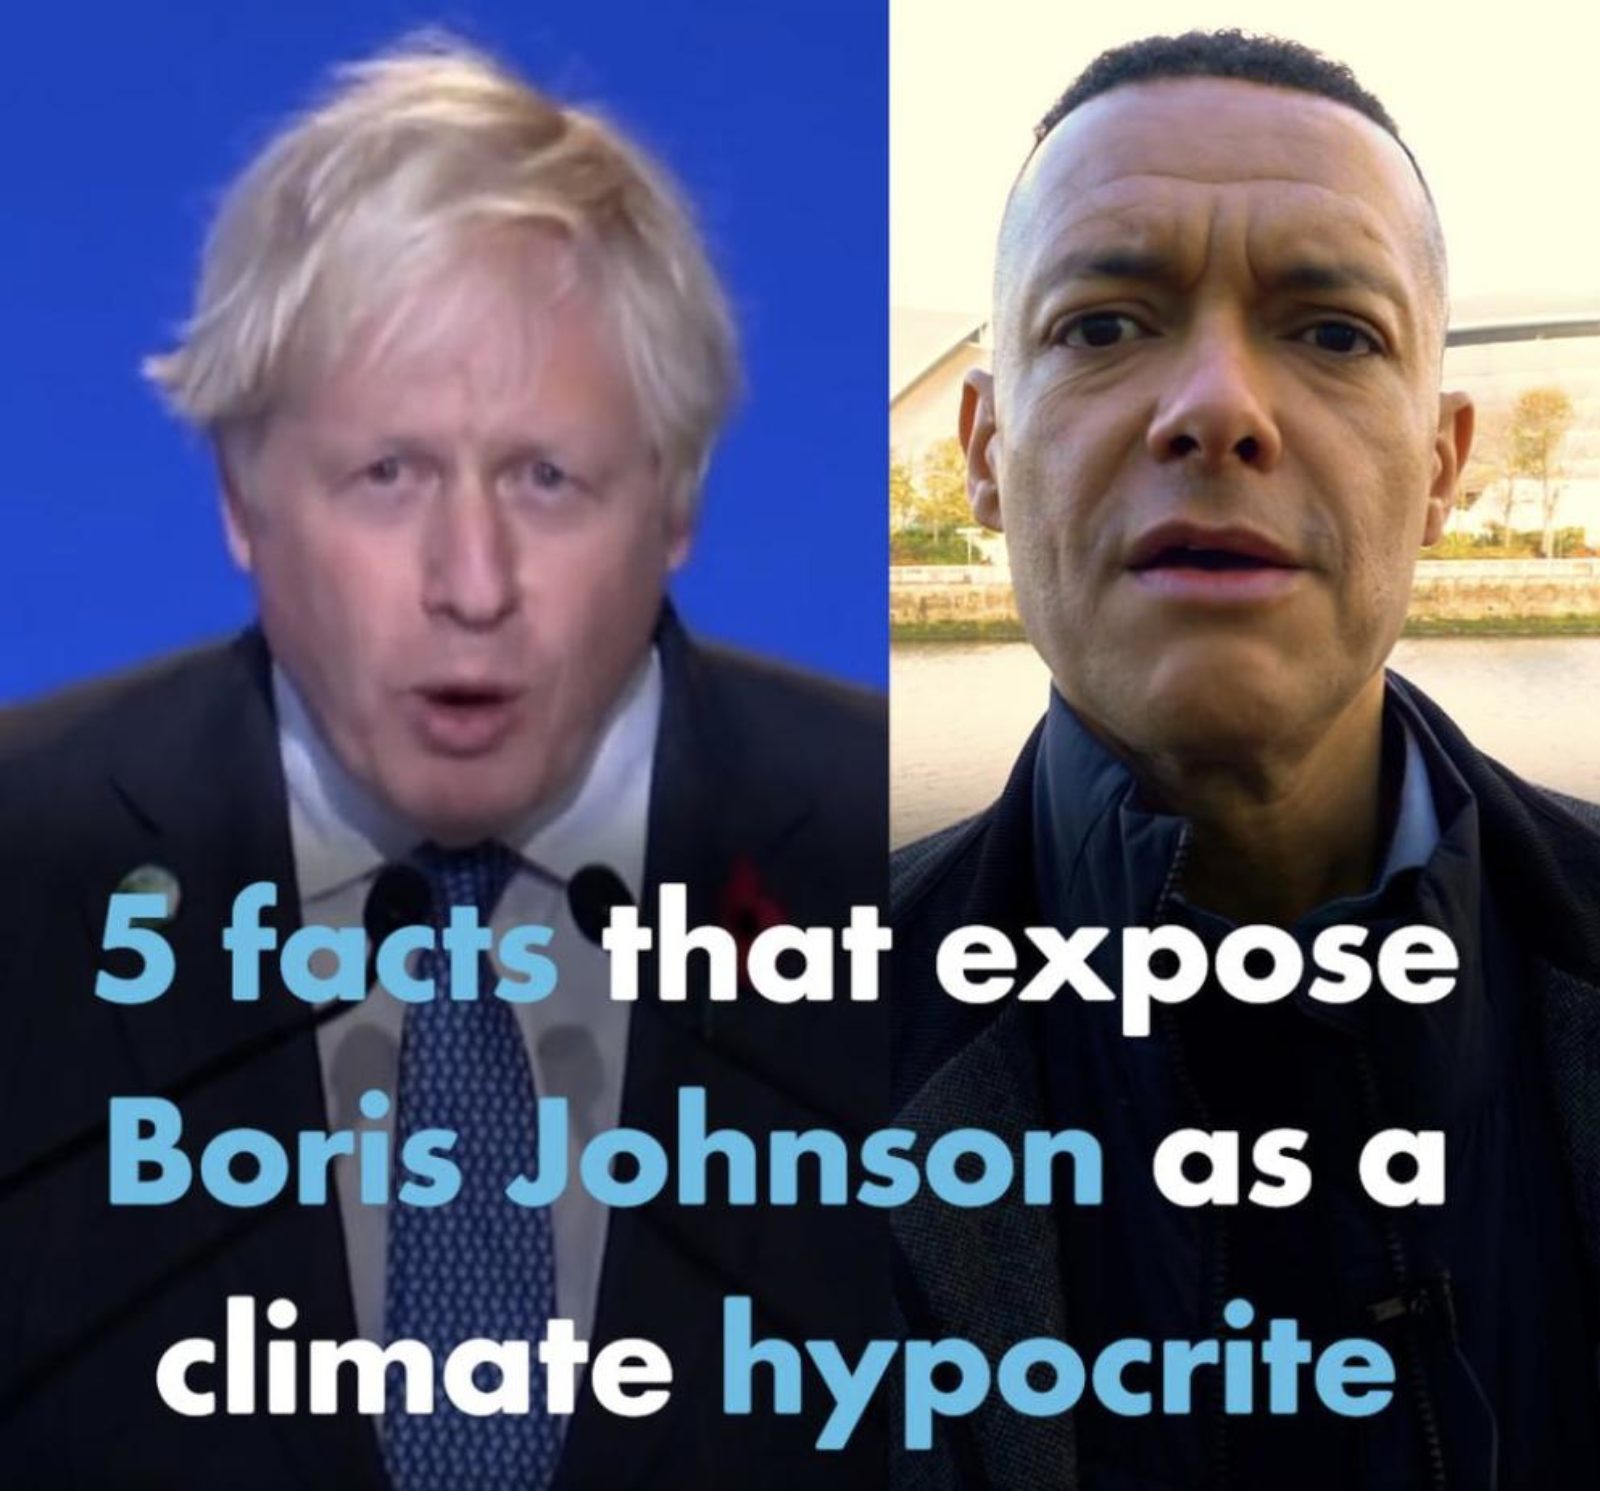 Image shows Clive Lewis and Boris Johnson with the words 